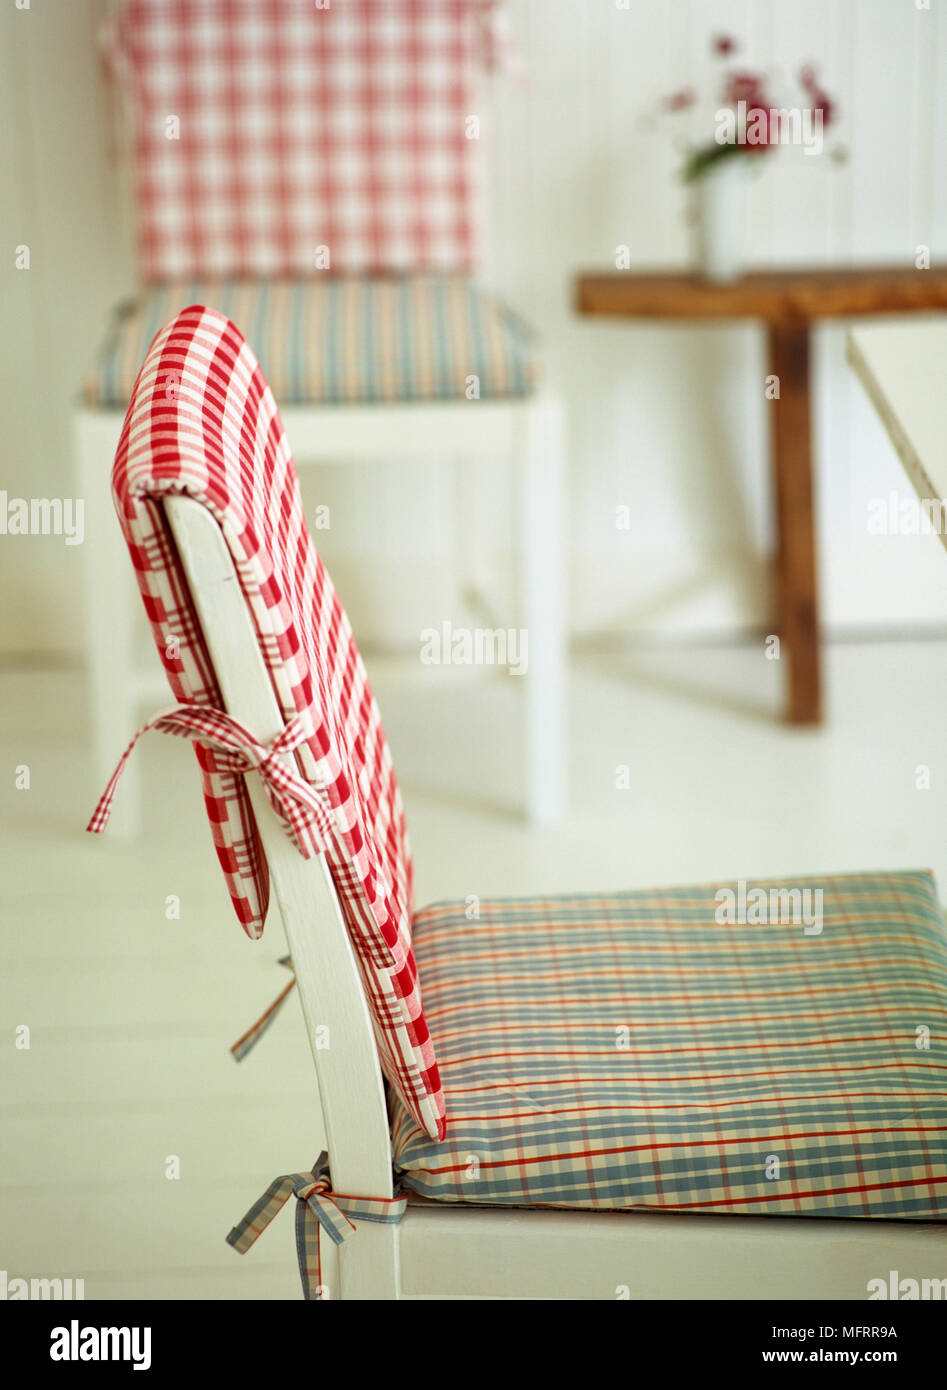 White wood chair with check pattern covers Stock Photo